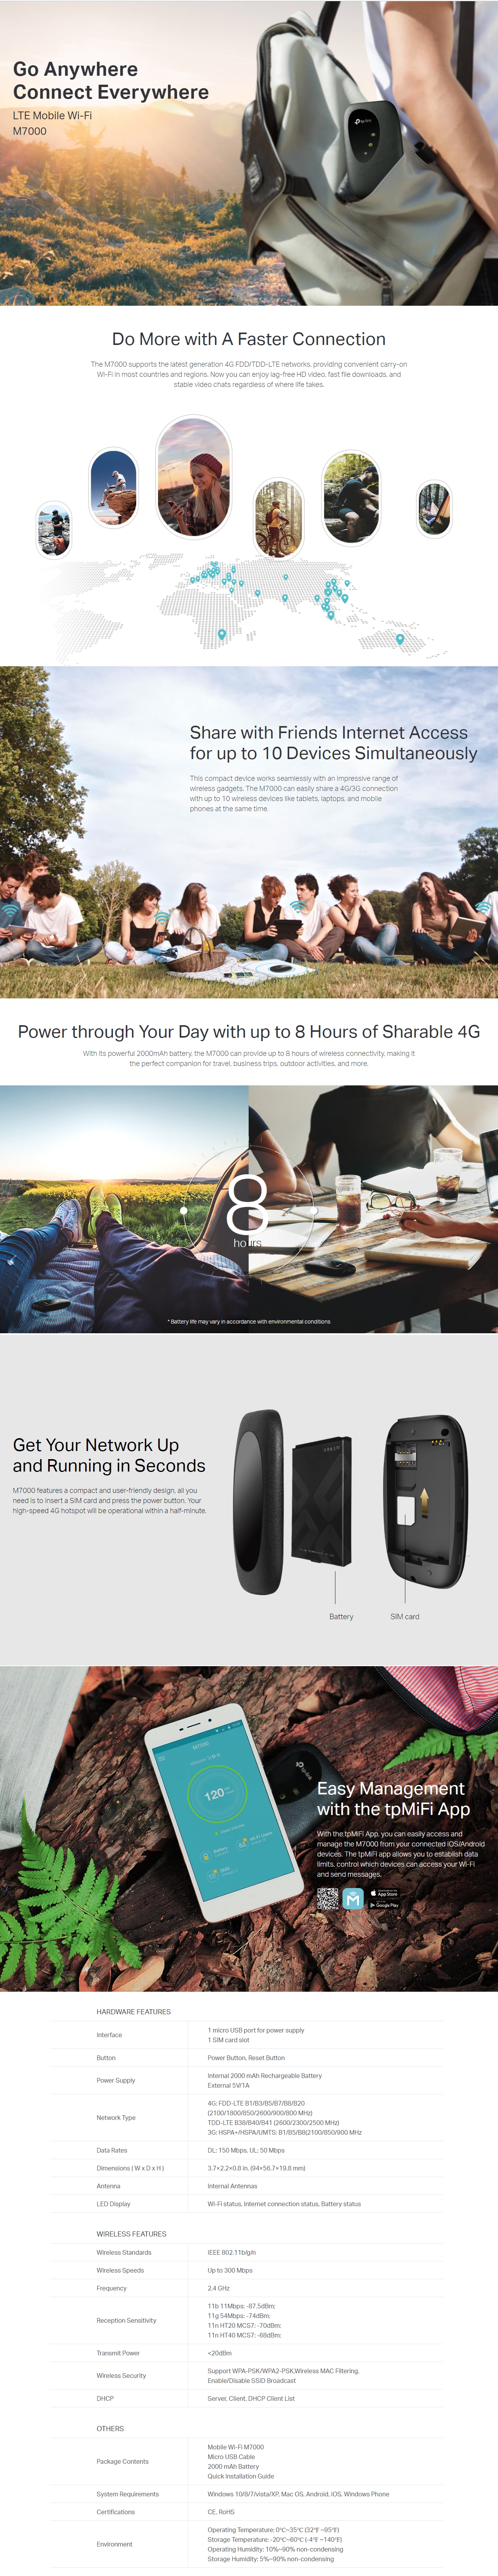 A large marketing image providing additional information about the product TP-Link M7000 - 4G LTE Mobile Wi-Fi Router - Additional alt info not provided